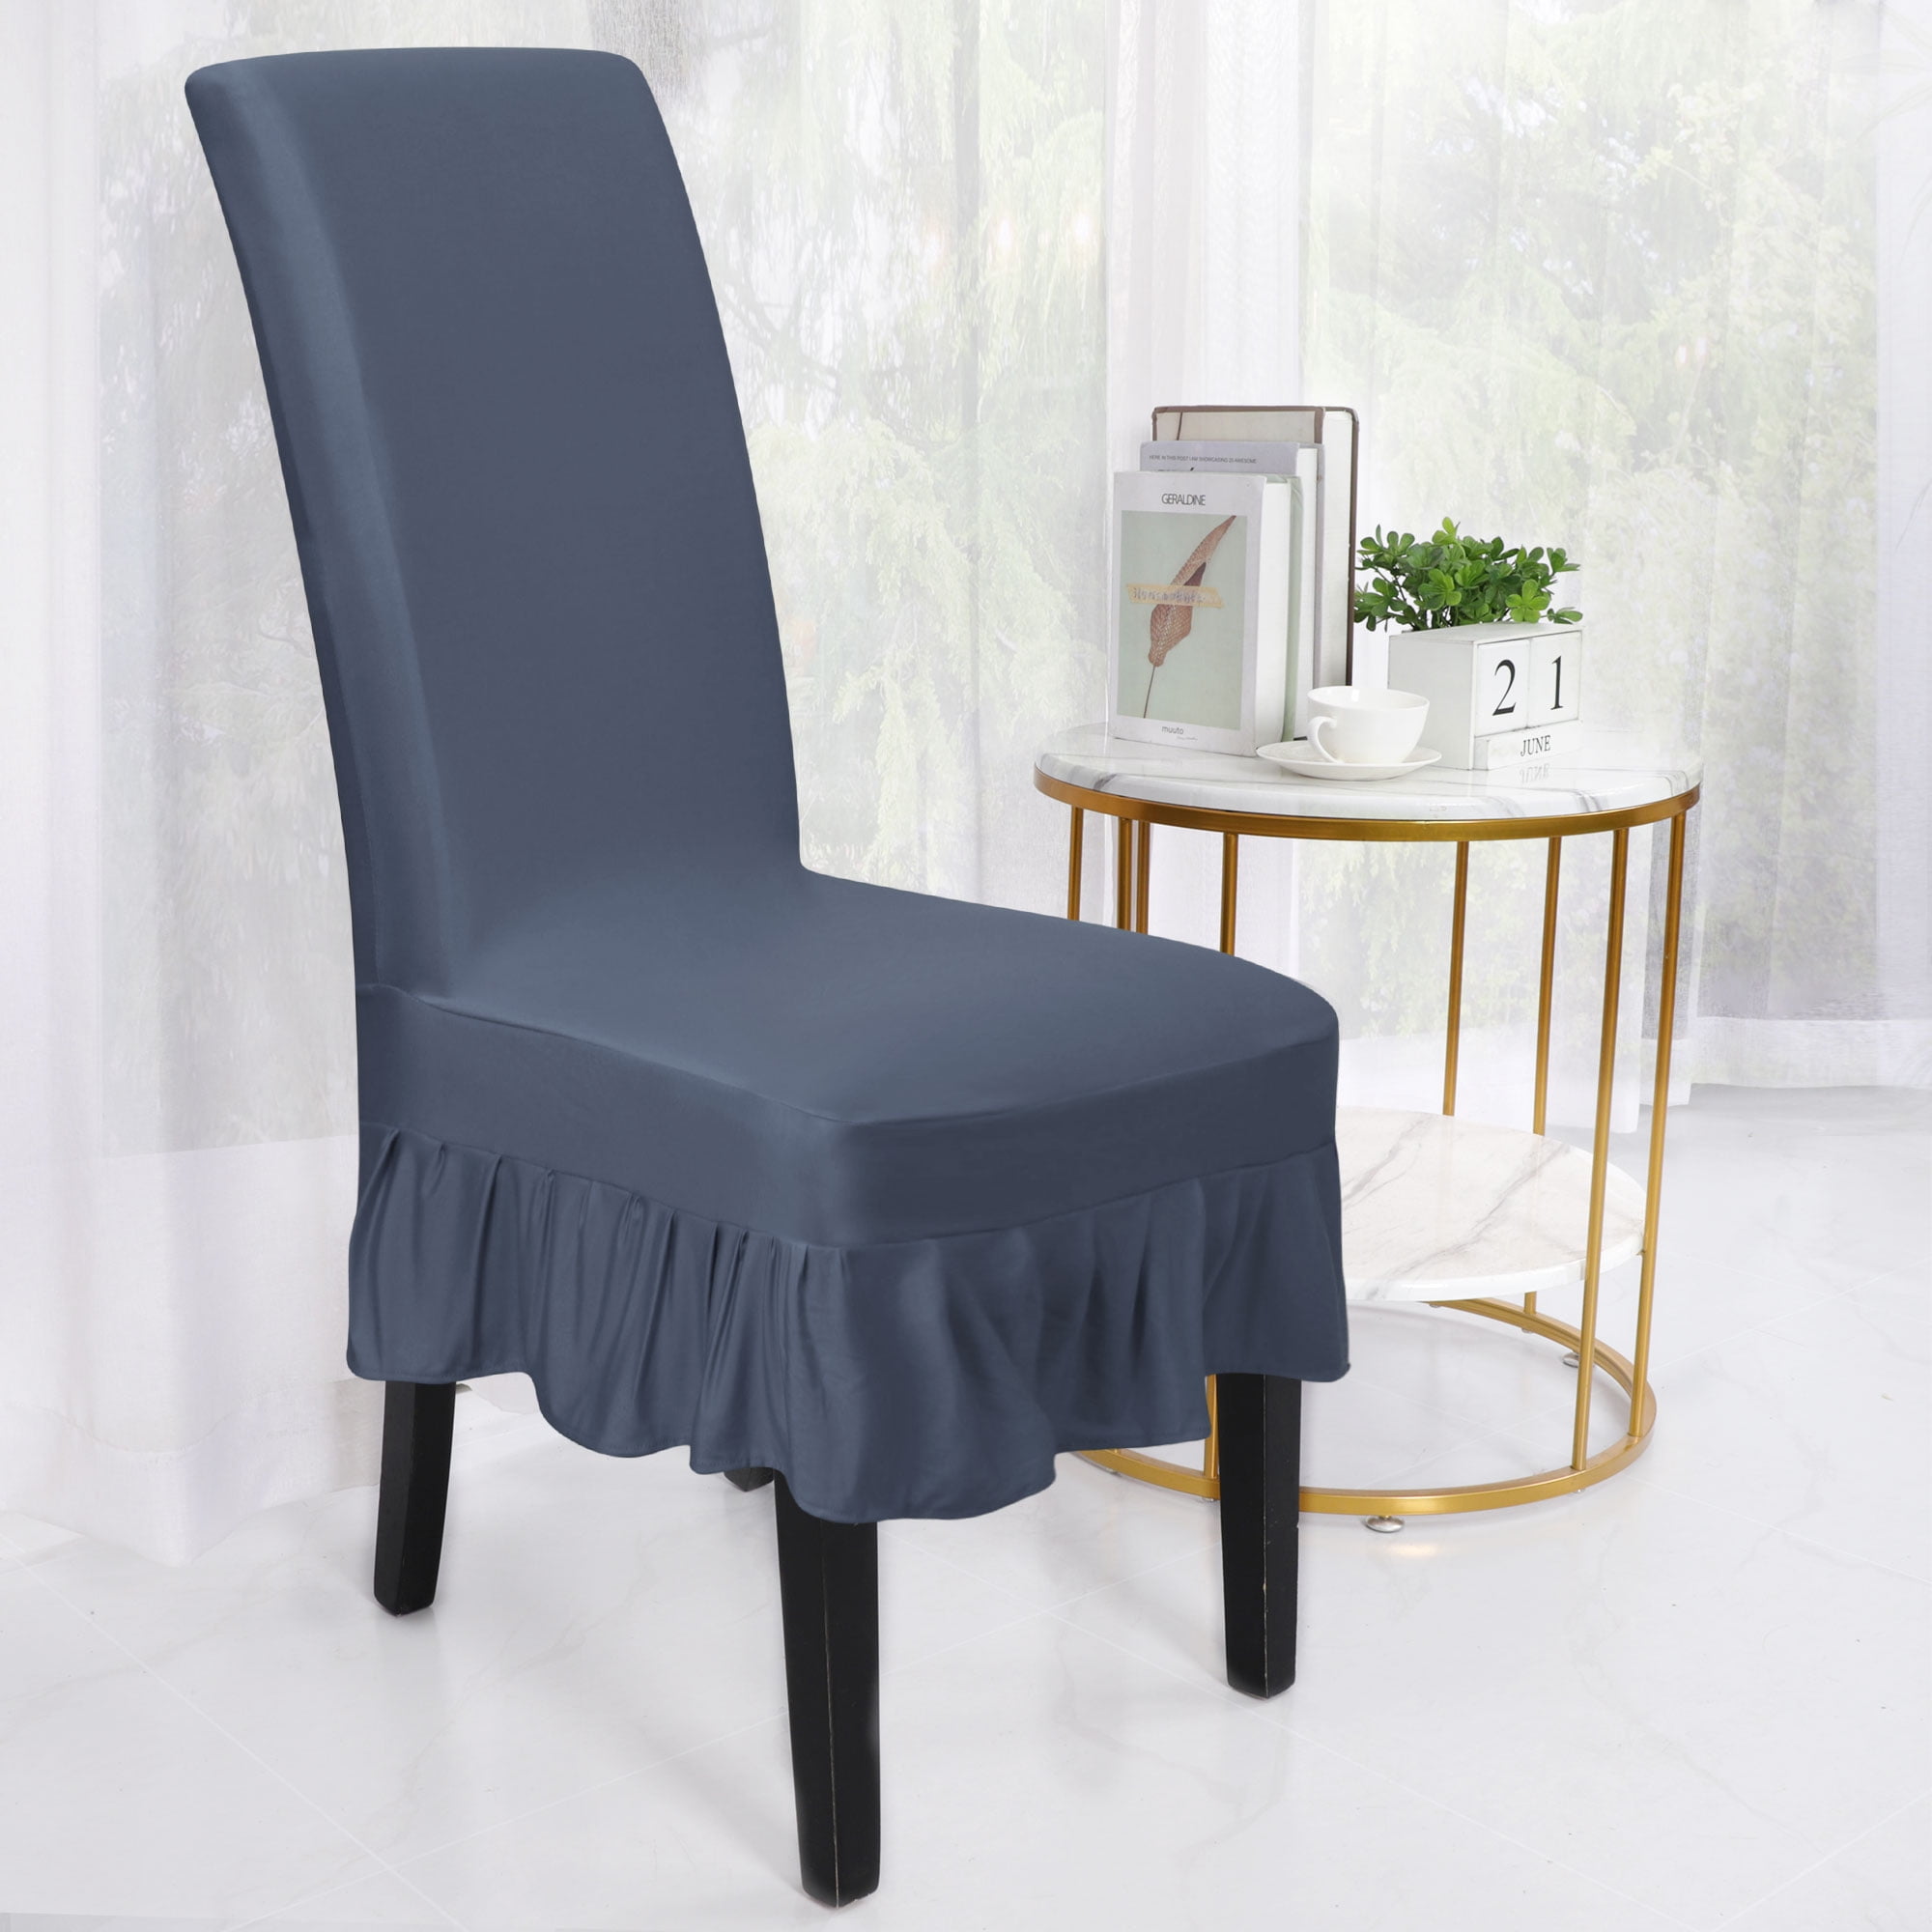 Details about   Stretchy Dining Chair Cover with Skirt Party Slipcovers Furniture Protector Home